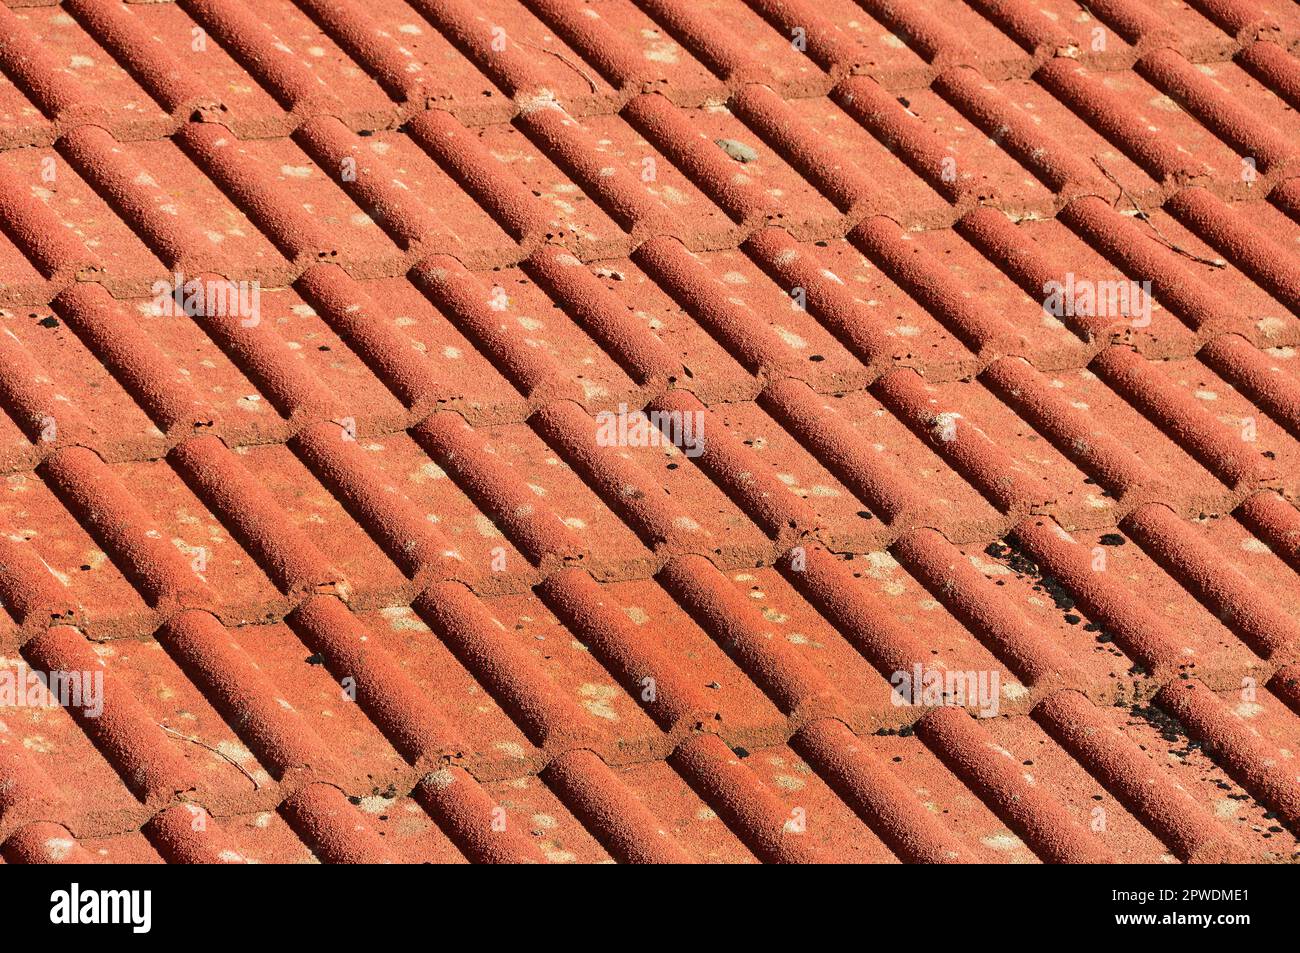 The tiled roof is covered with bird droppings Stock Photo